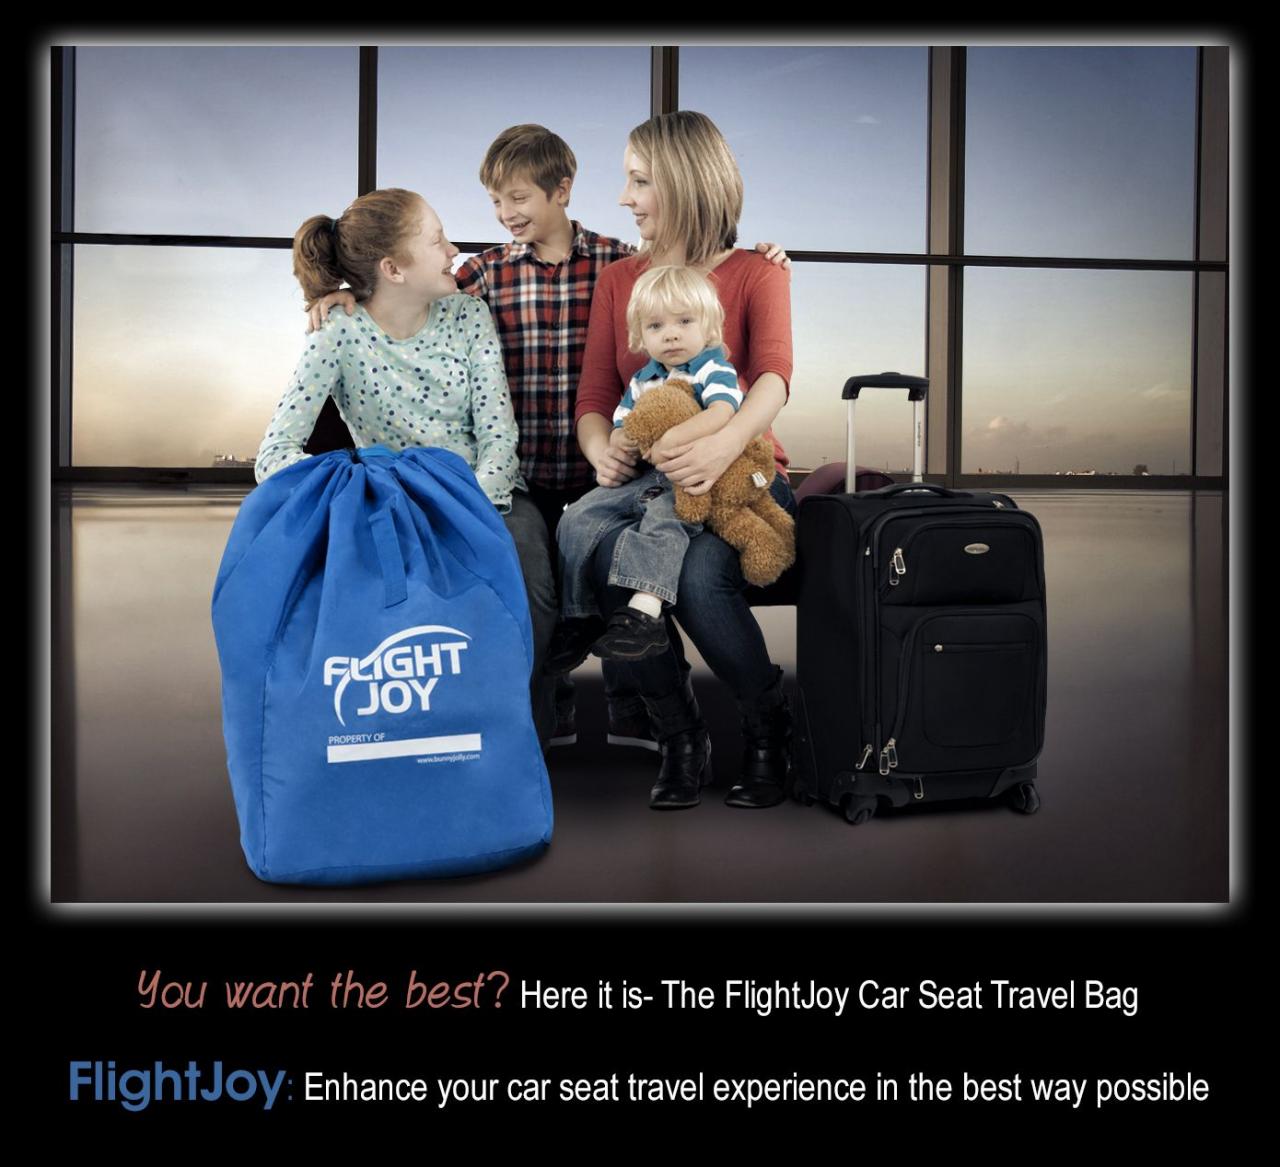 Flightjoy #carseattravelbag, #gatecheck -Traveling made simple for your  whole family. http://tinyurl.com/pcdzt53 | Car seat travel bag, Car seats, Travel  bag